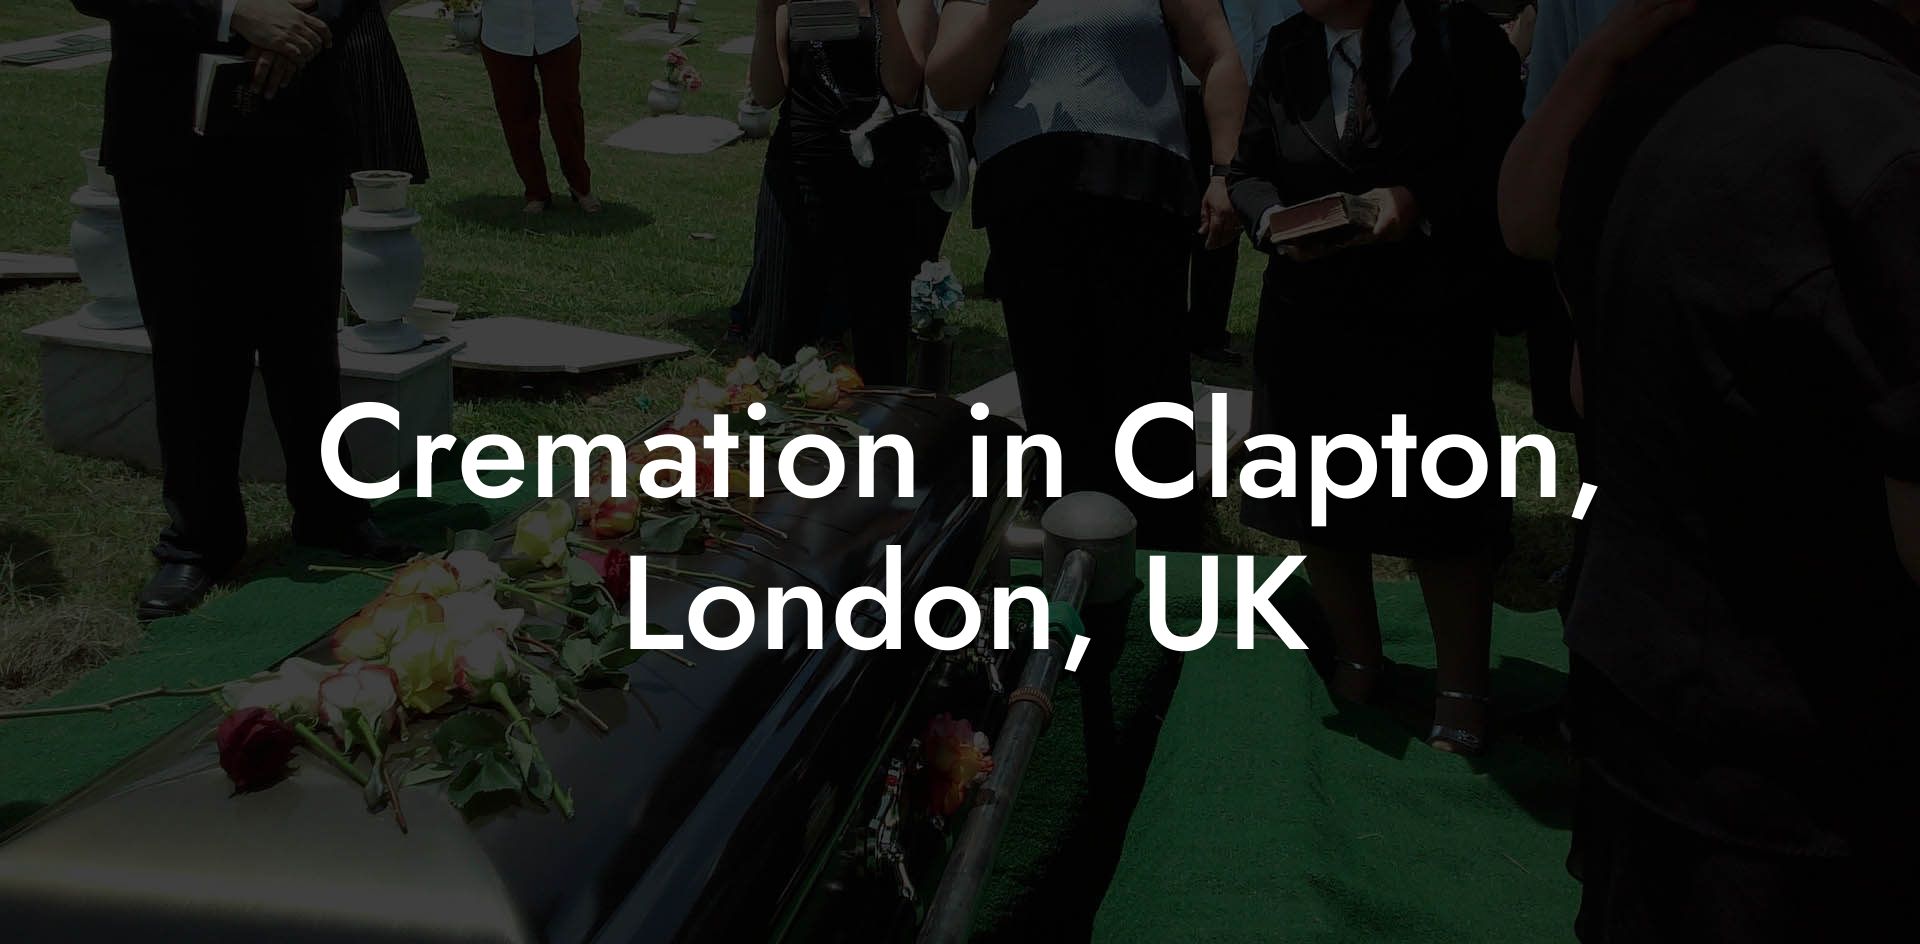 Cremation in Clapton, London, UK